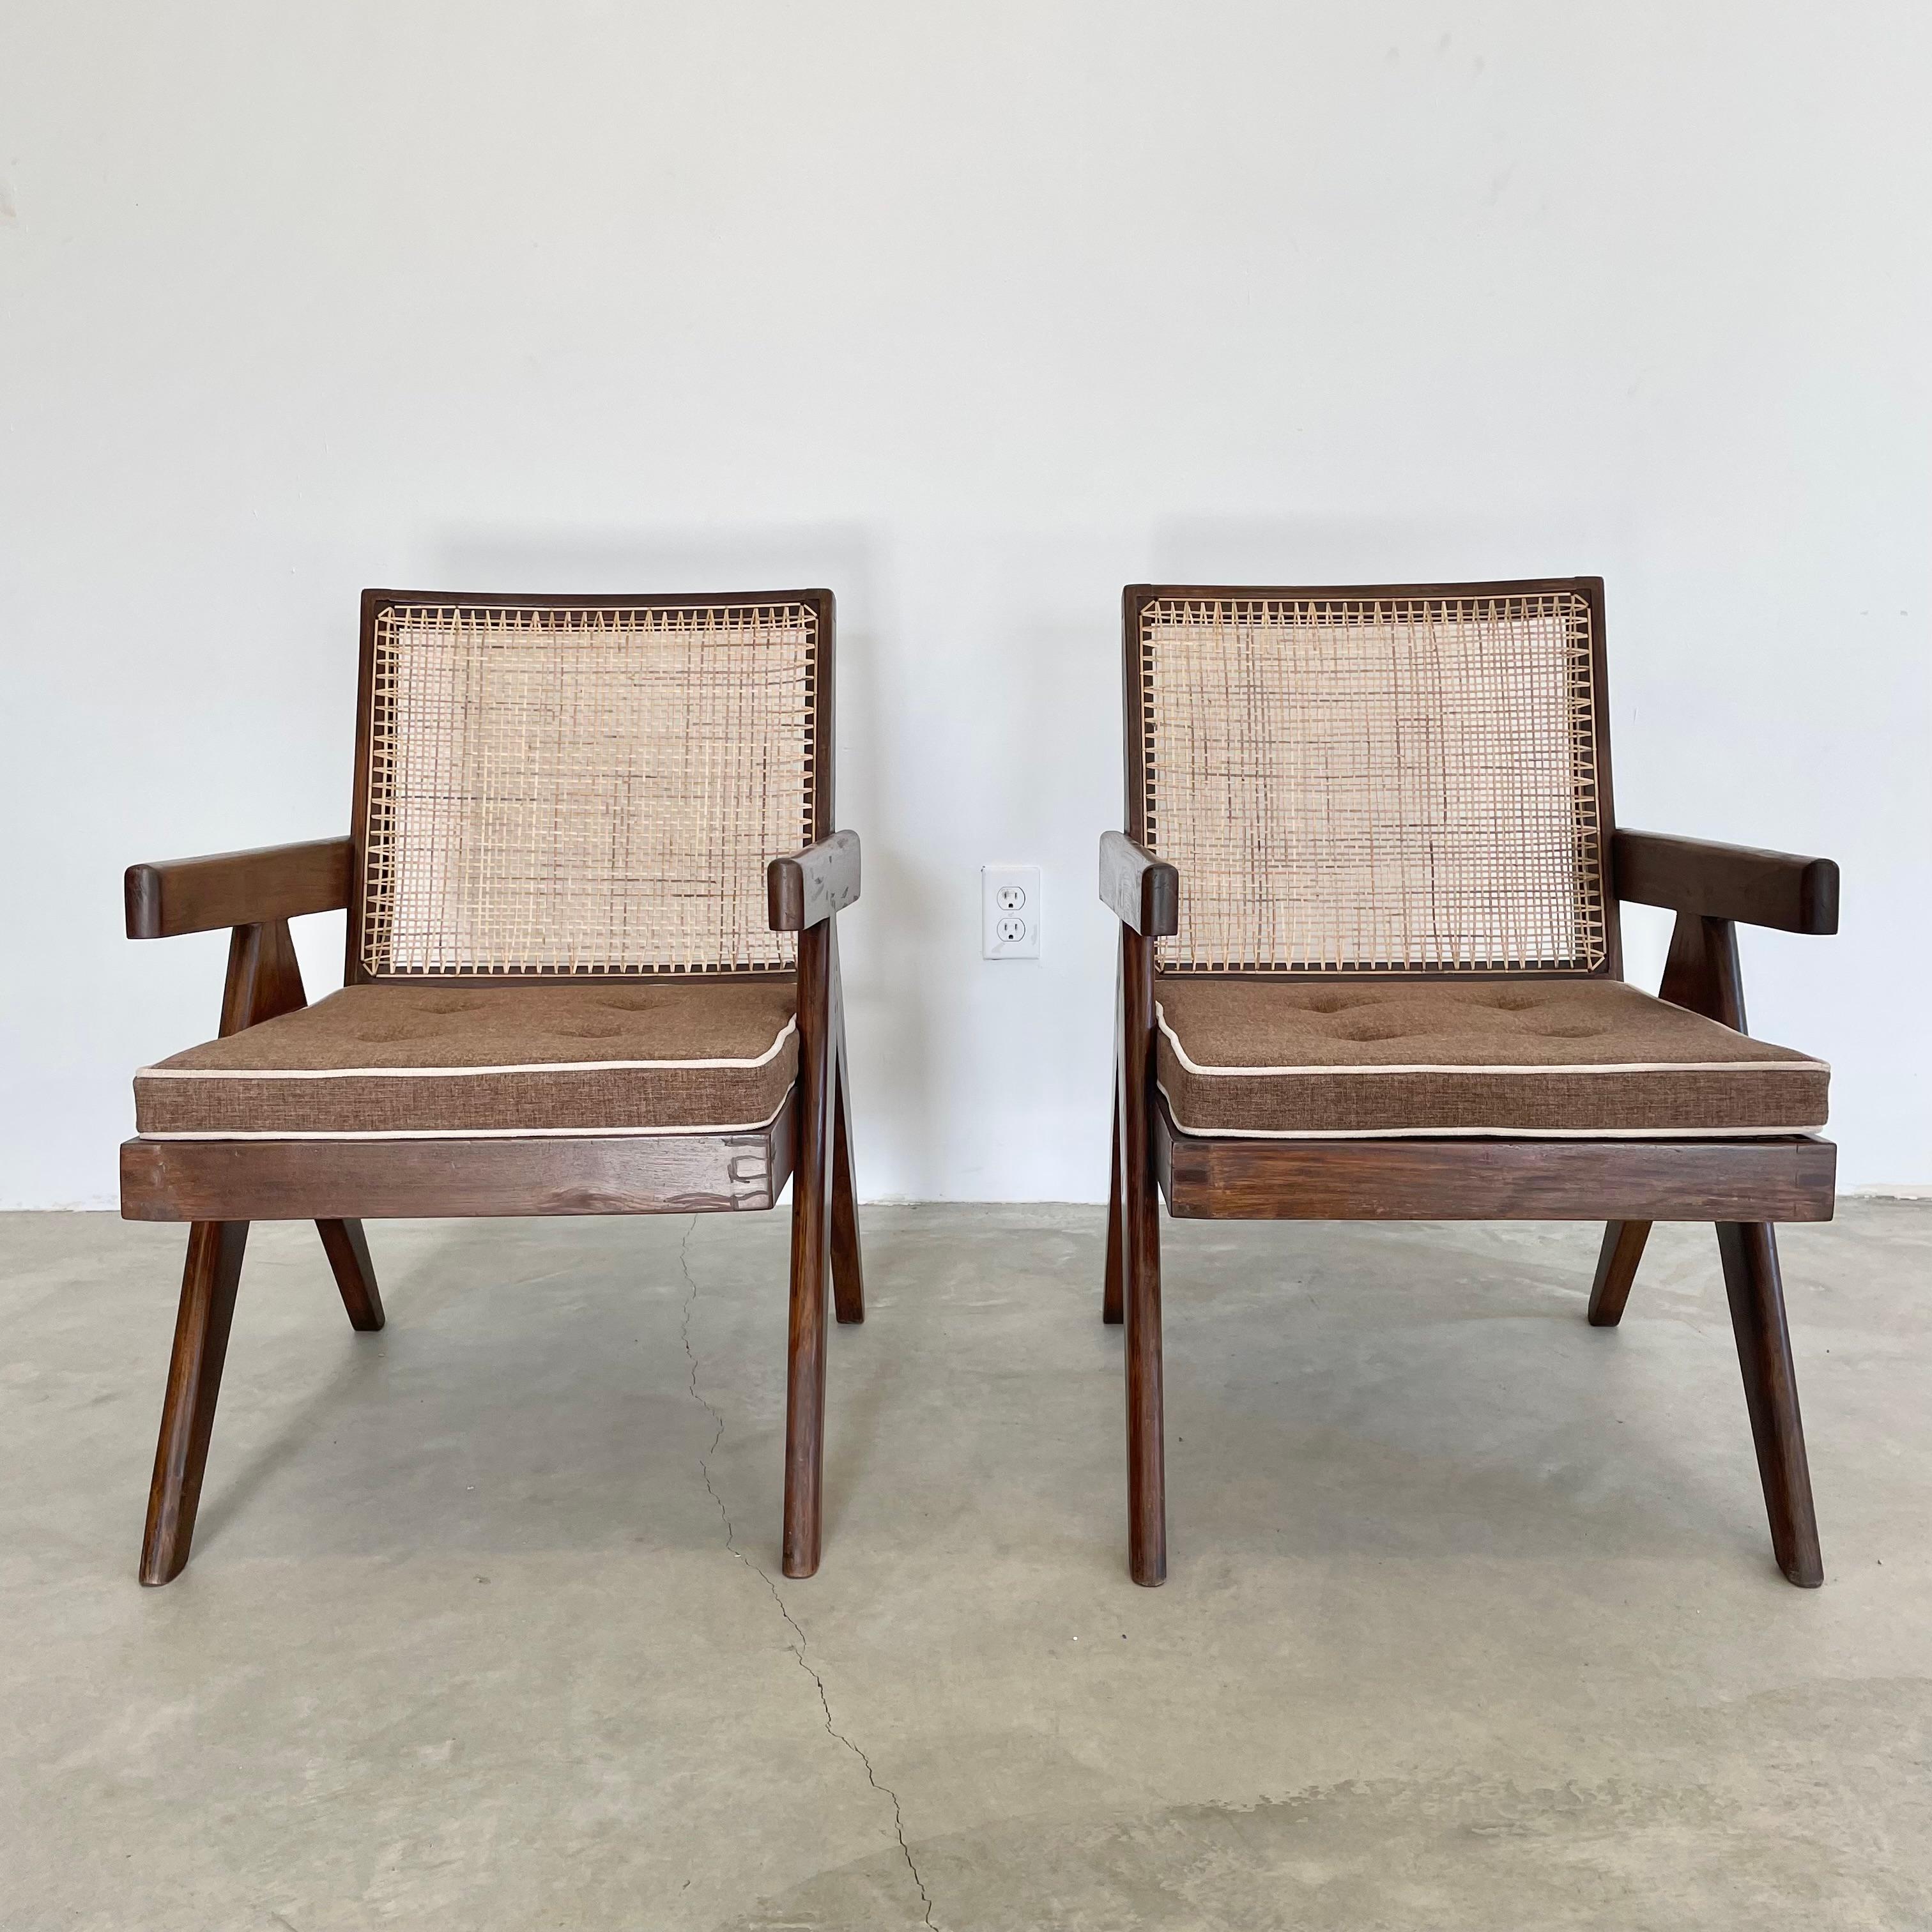 Fantastic collection of Pierre Jeanneret Easy chairs / lounge chairs. Model PJ-SI-29-A. Solid teak chairs with compass style legs, cane seat, and cane seat back. Hand stenciling on the back of both chairs reads : Ch.L.(P)-072 and Ch.L.(P)-044